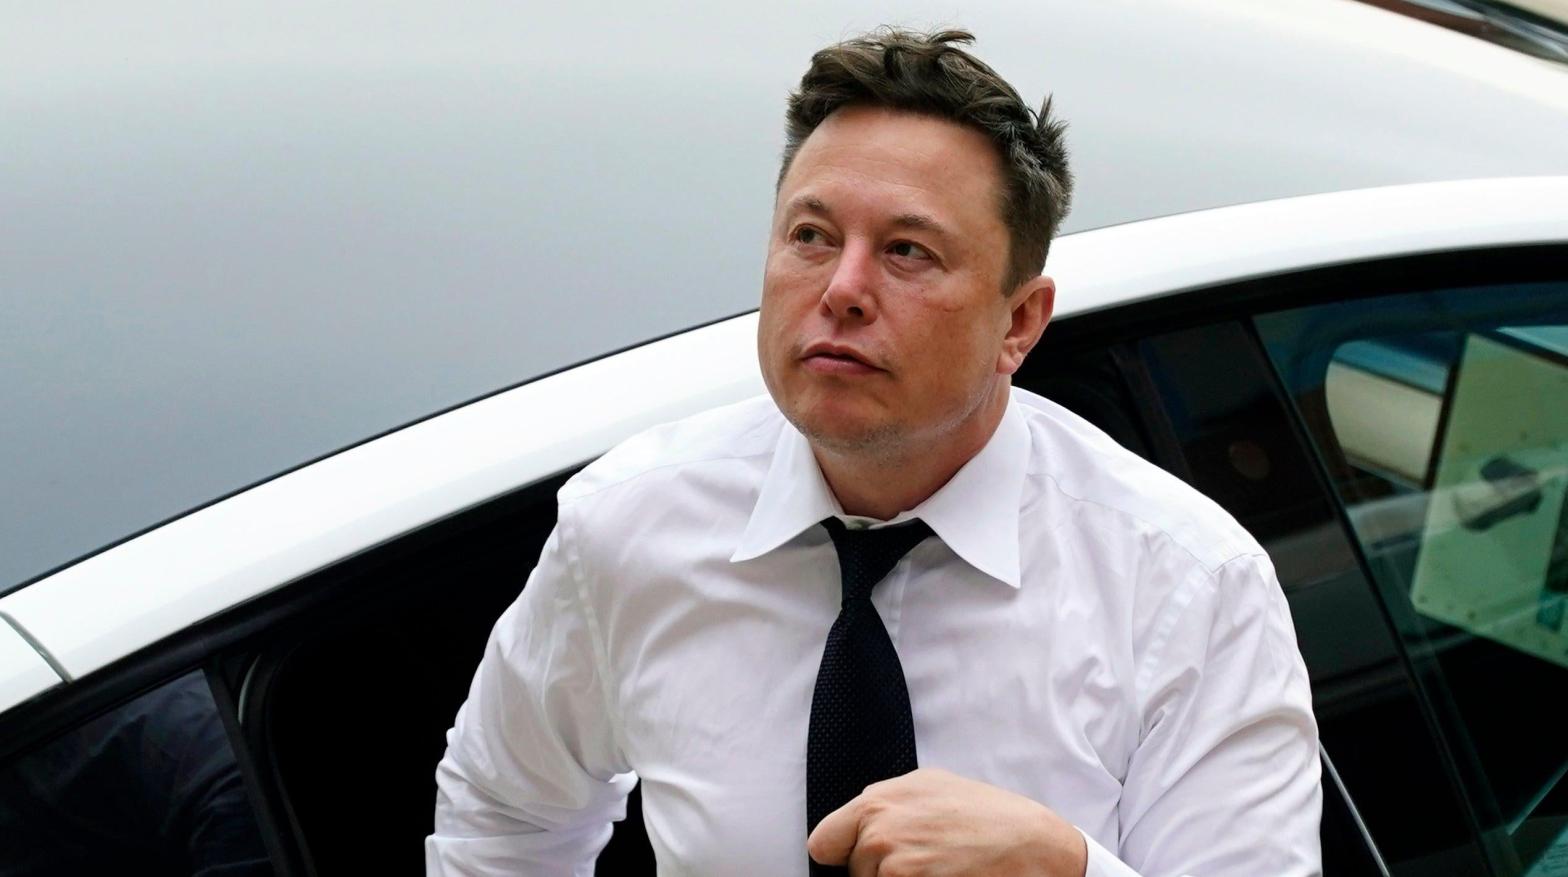 Elon Musk arrives at the justice centre in Wilmington, Del., Tuesday, July 13, 2021. (Photo: Matt Rourke, File, AP)